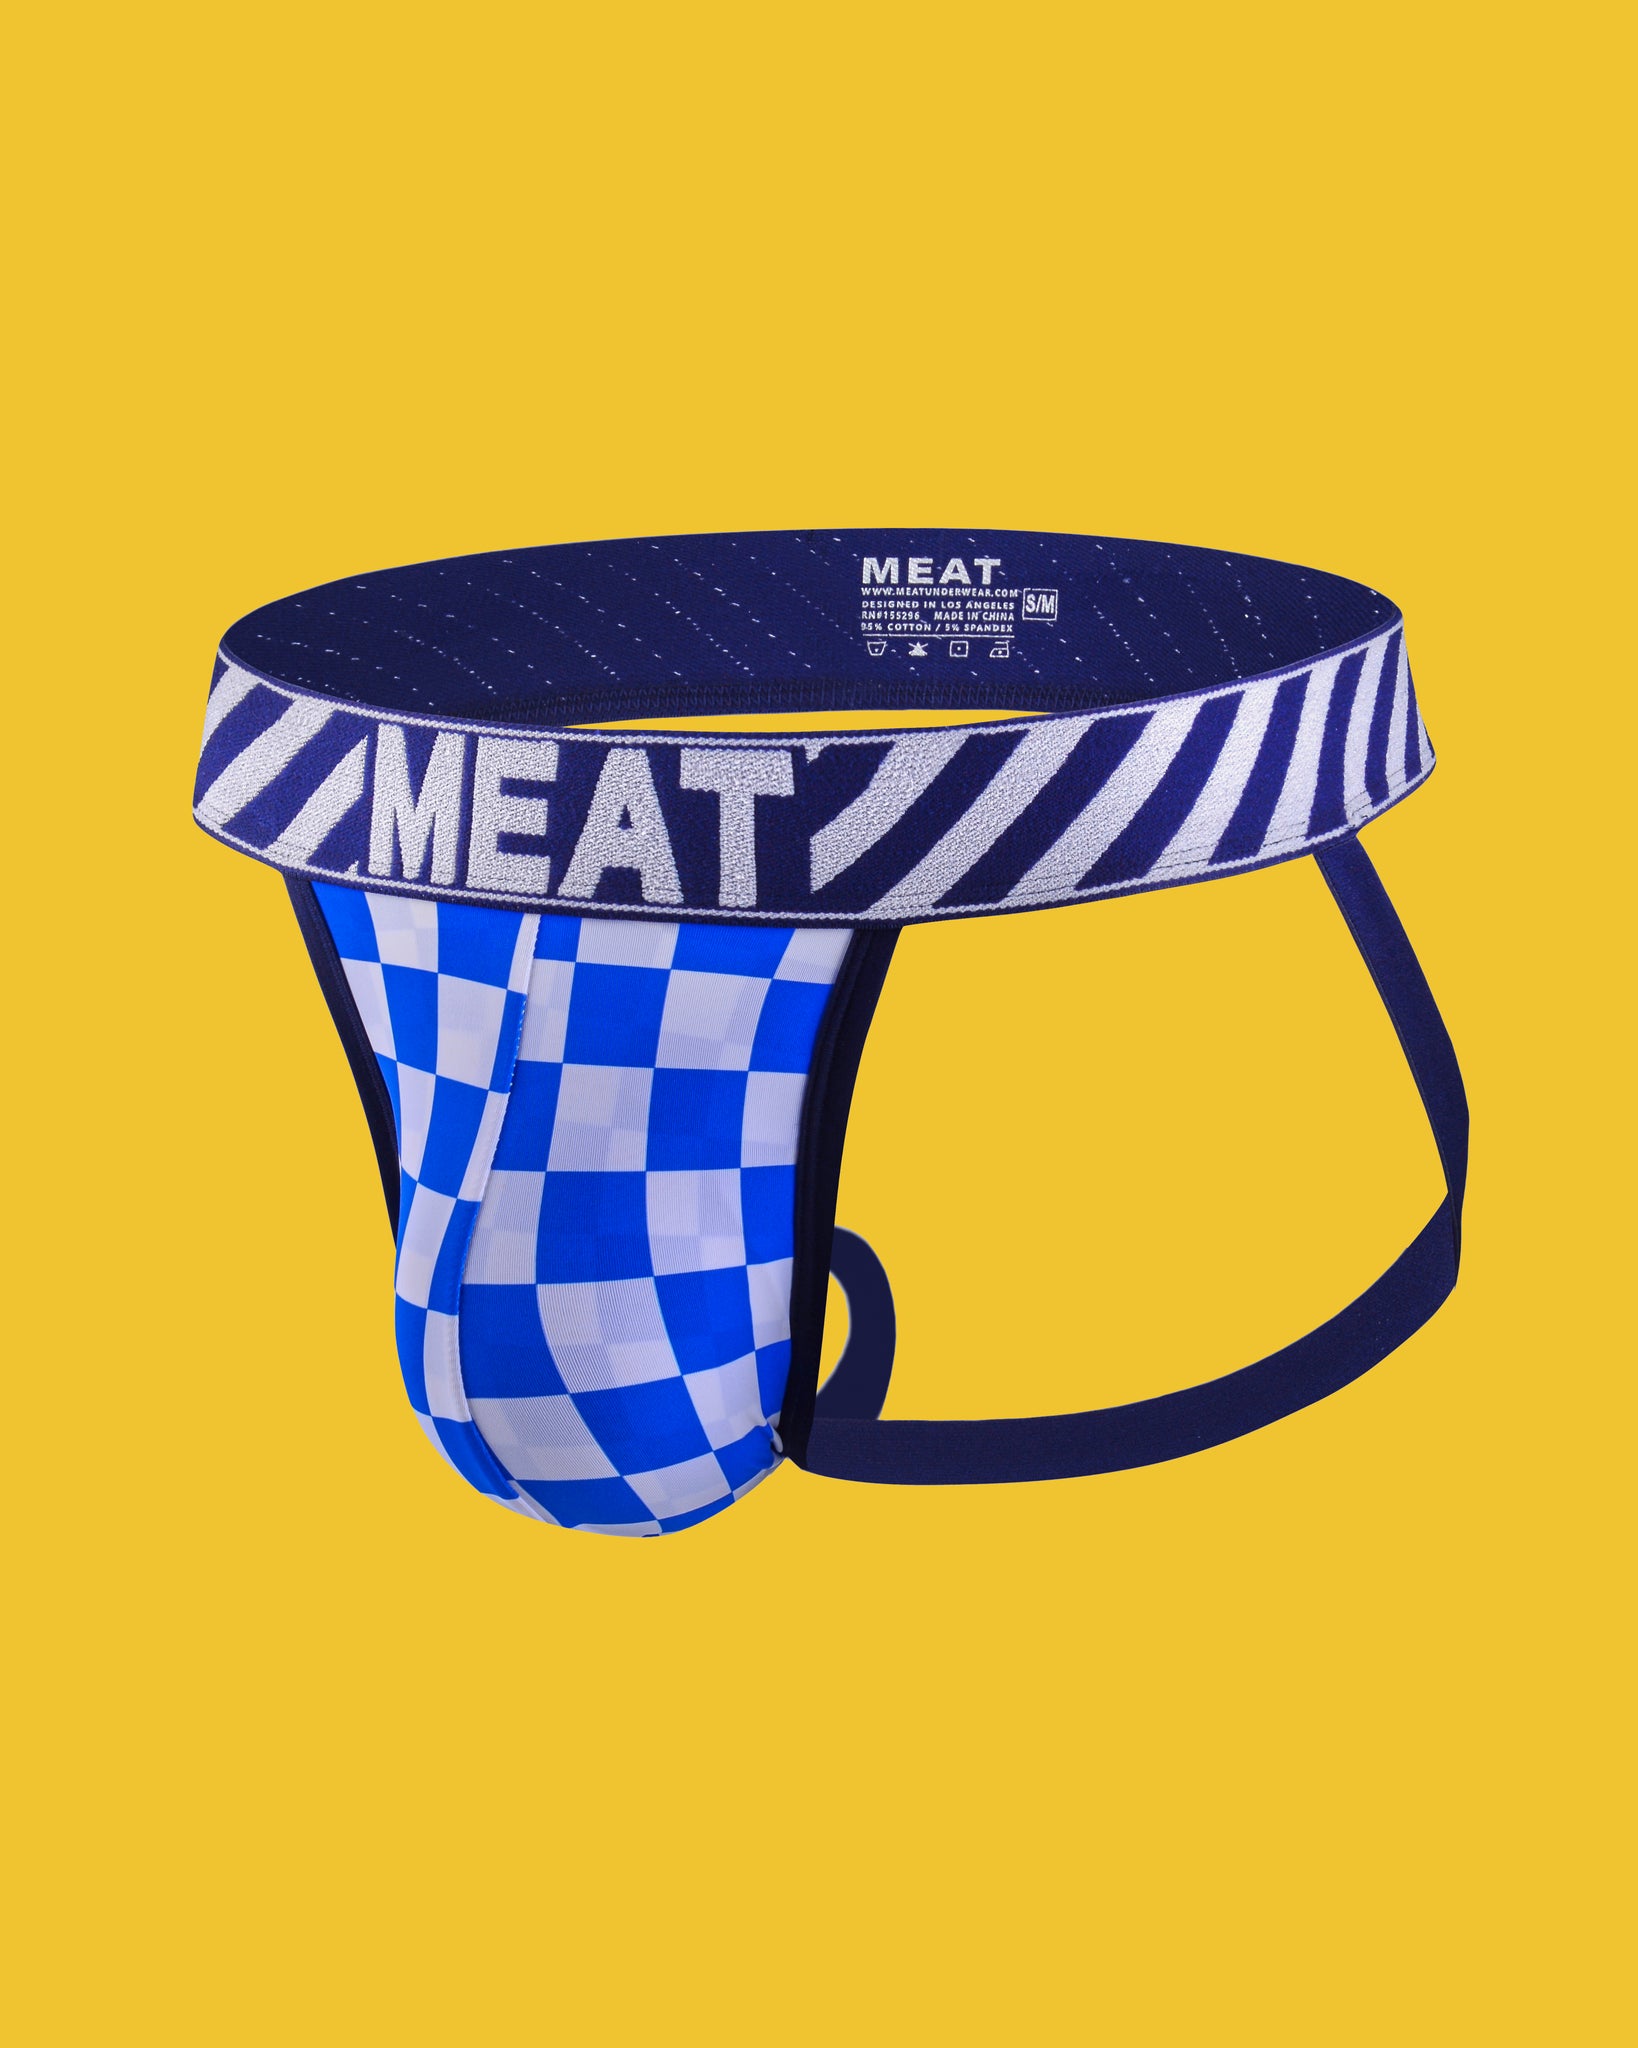 ALL AMERICAN FITTED JOCK - CHECKERED BLUE